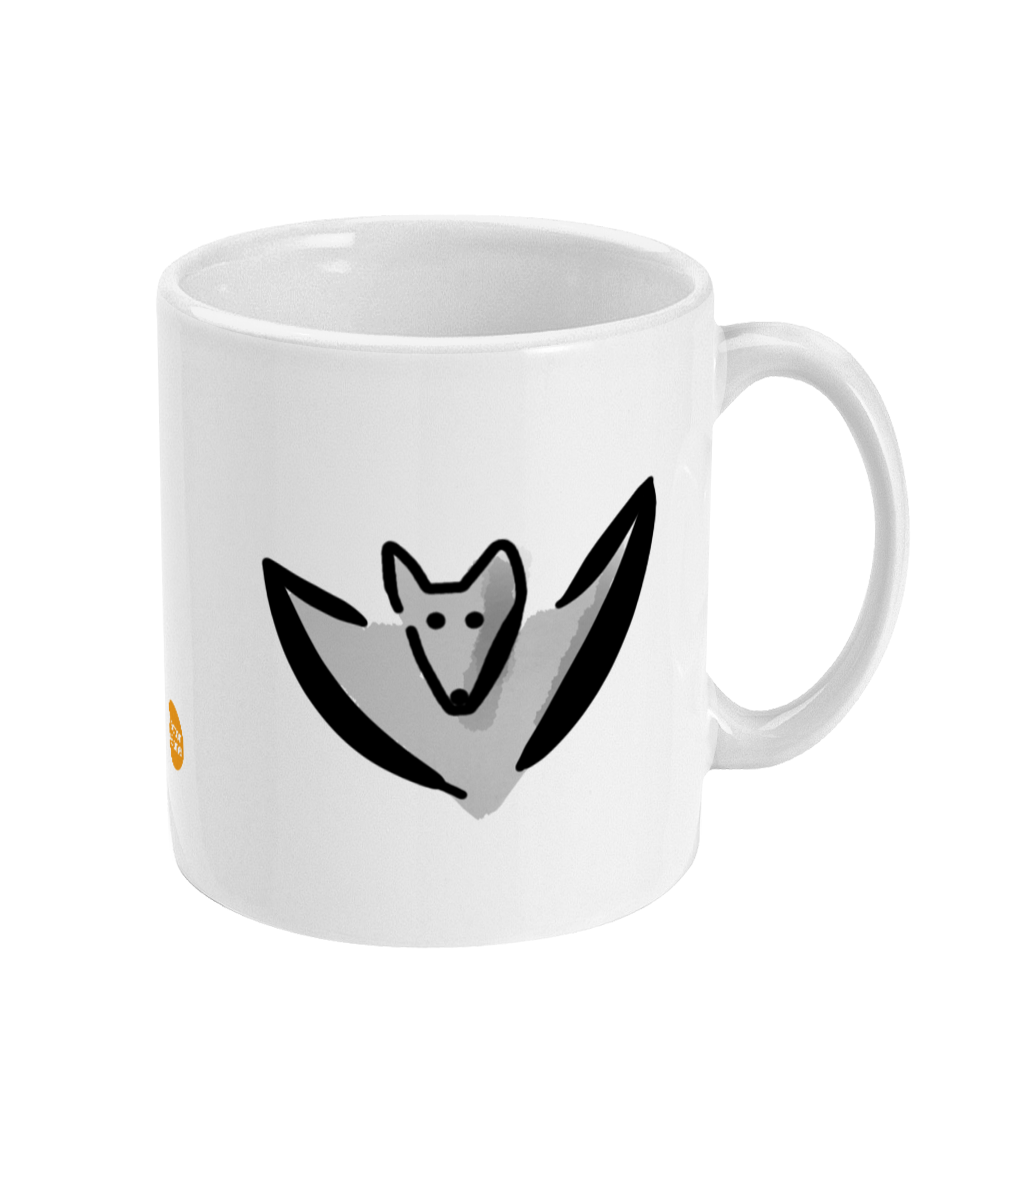 Bertie Bat design coffee mug by Hector and Bone Right View